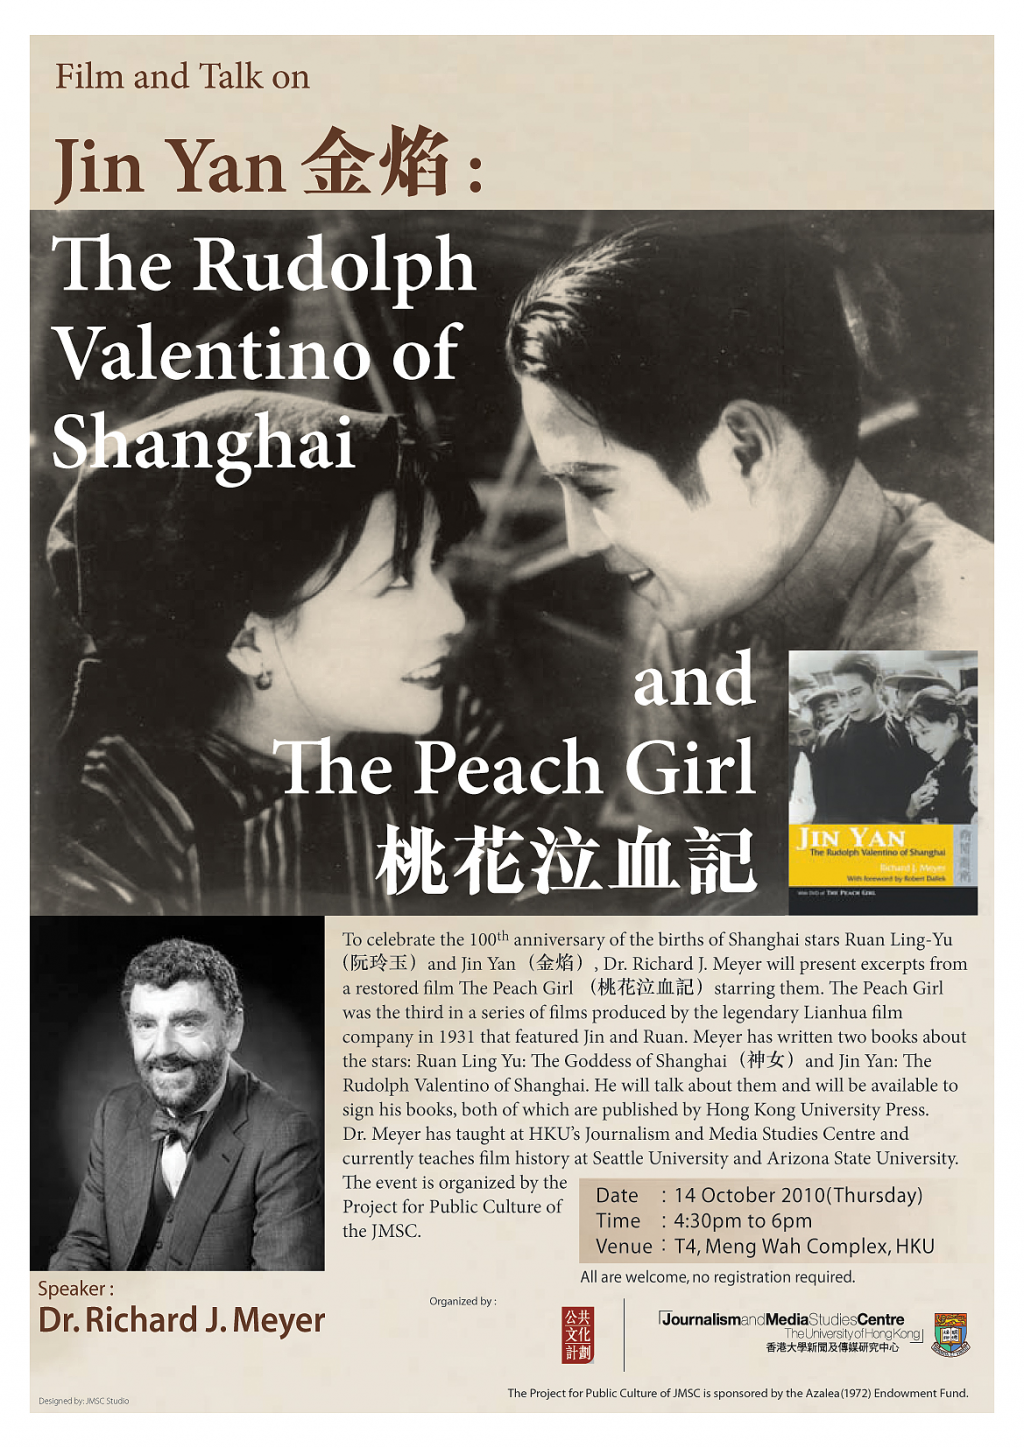 Film and Talk on Jin Yan : The Rudolph Valentino of Shanghai